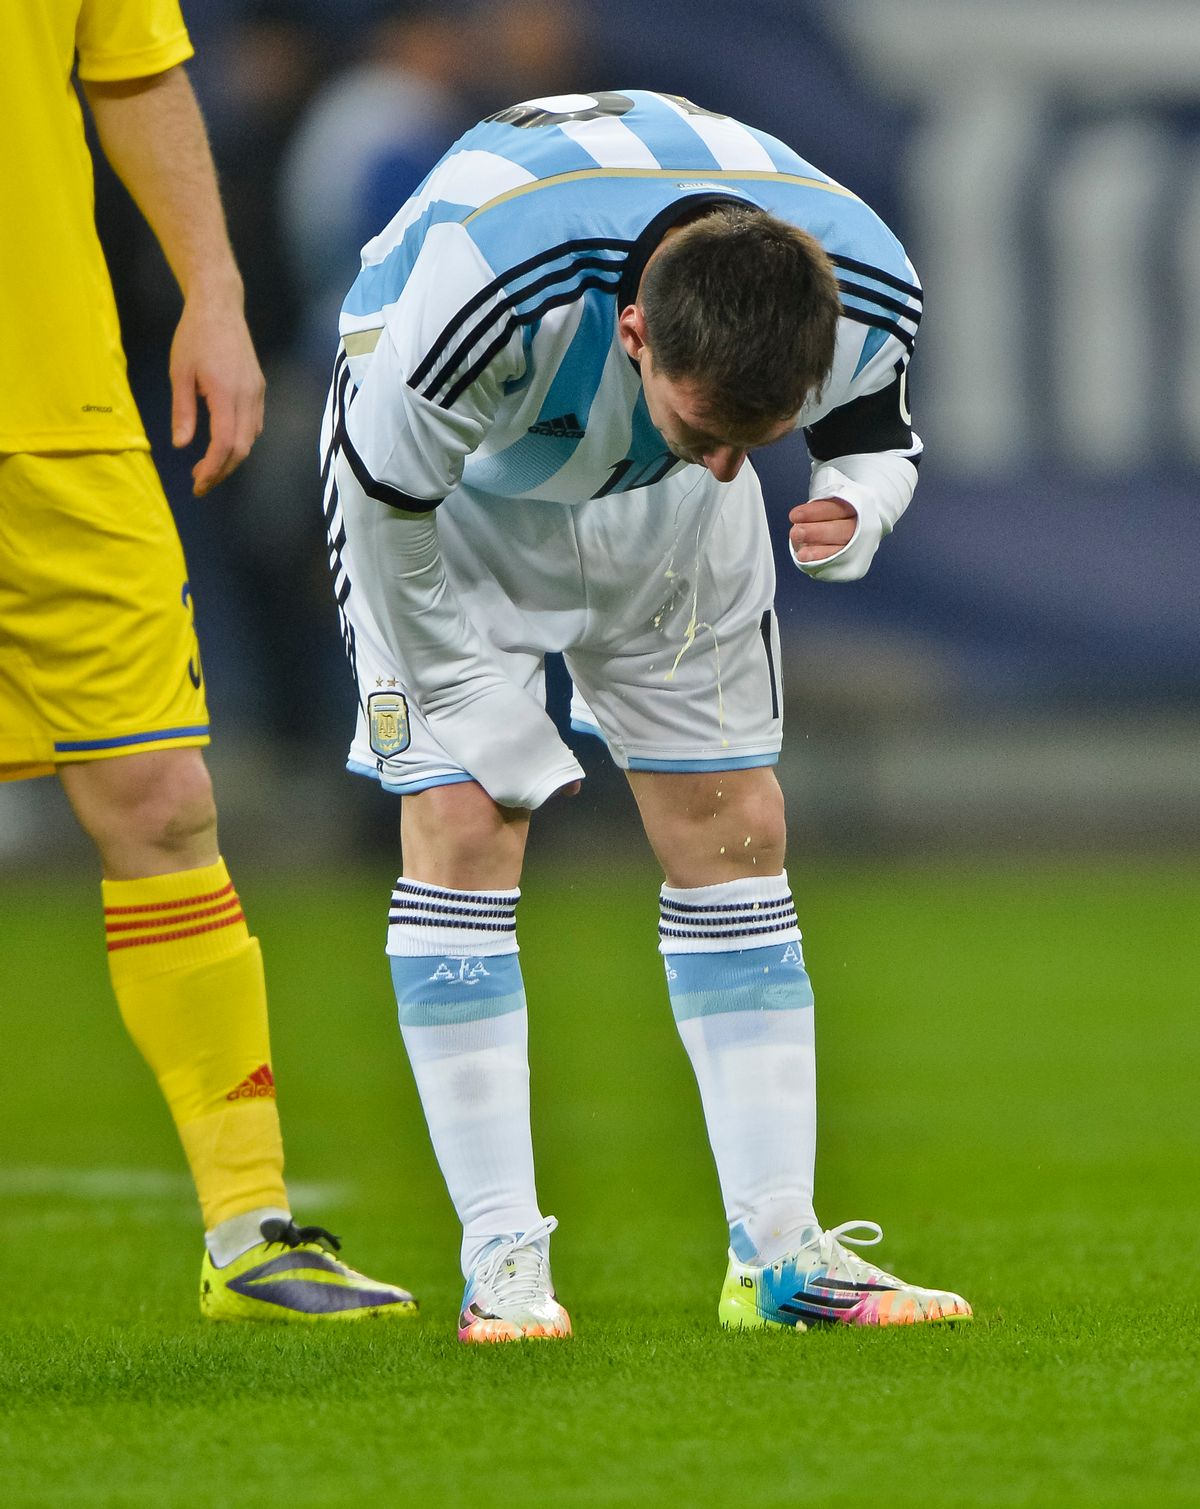 FILE - In this March 5, 2014 file photo, Argentina's Lionel Messi appears to vomit during an international friendly soccer game against Romania on the National Arena stadium in Bucharest, Romania. Messi has vomited at least a half-dozen times with Argentina and club team Barcelona, mystifying doctors and fans alike. (AP Photo, File) ROMANIA OUT (AP)